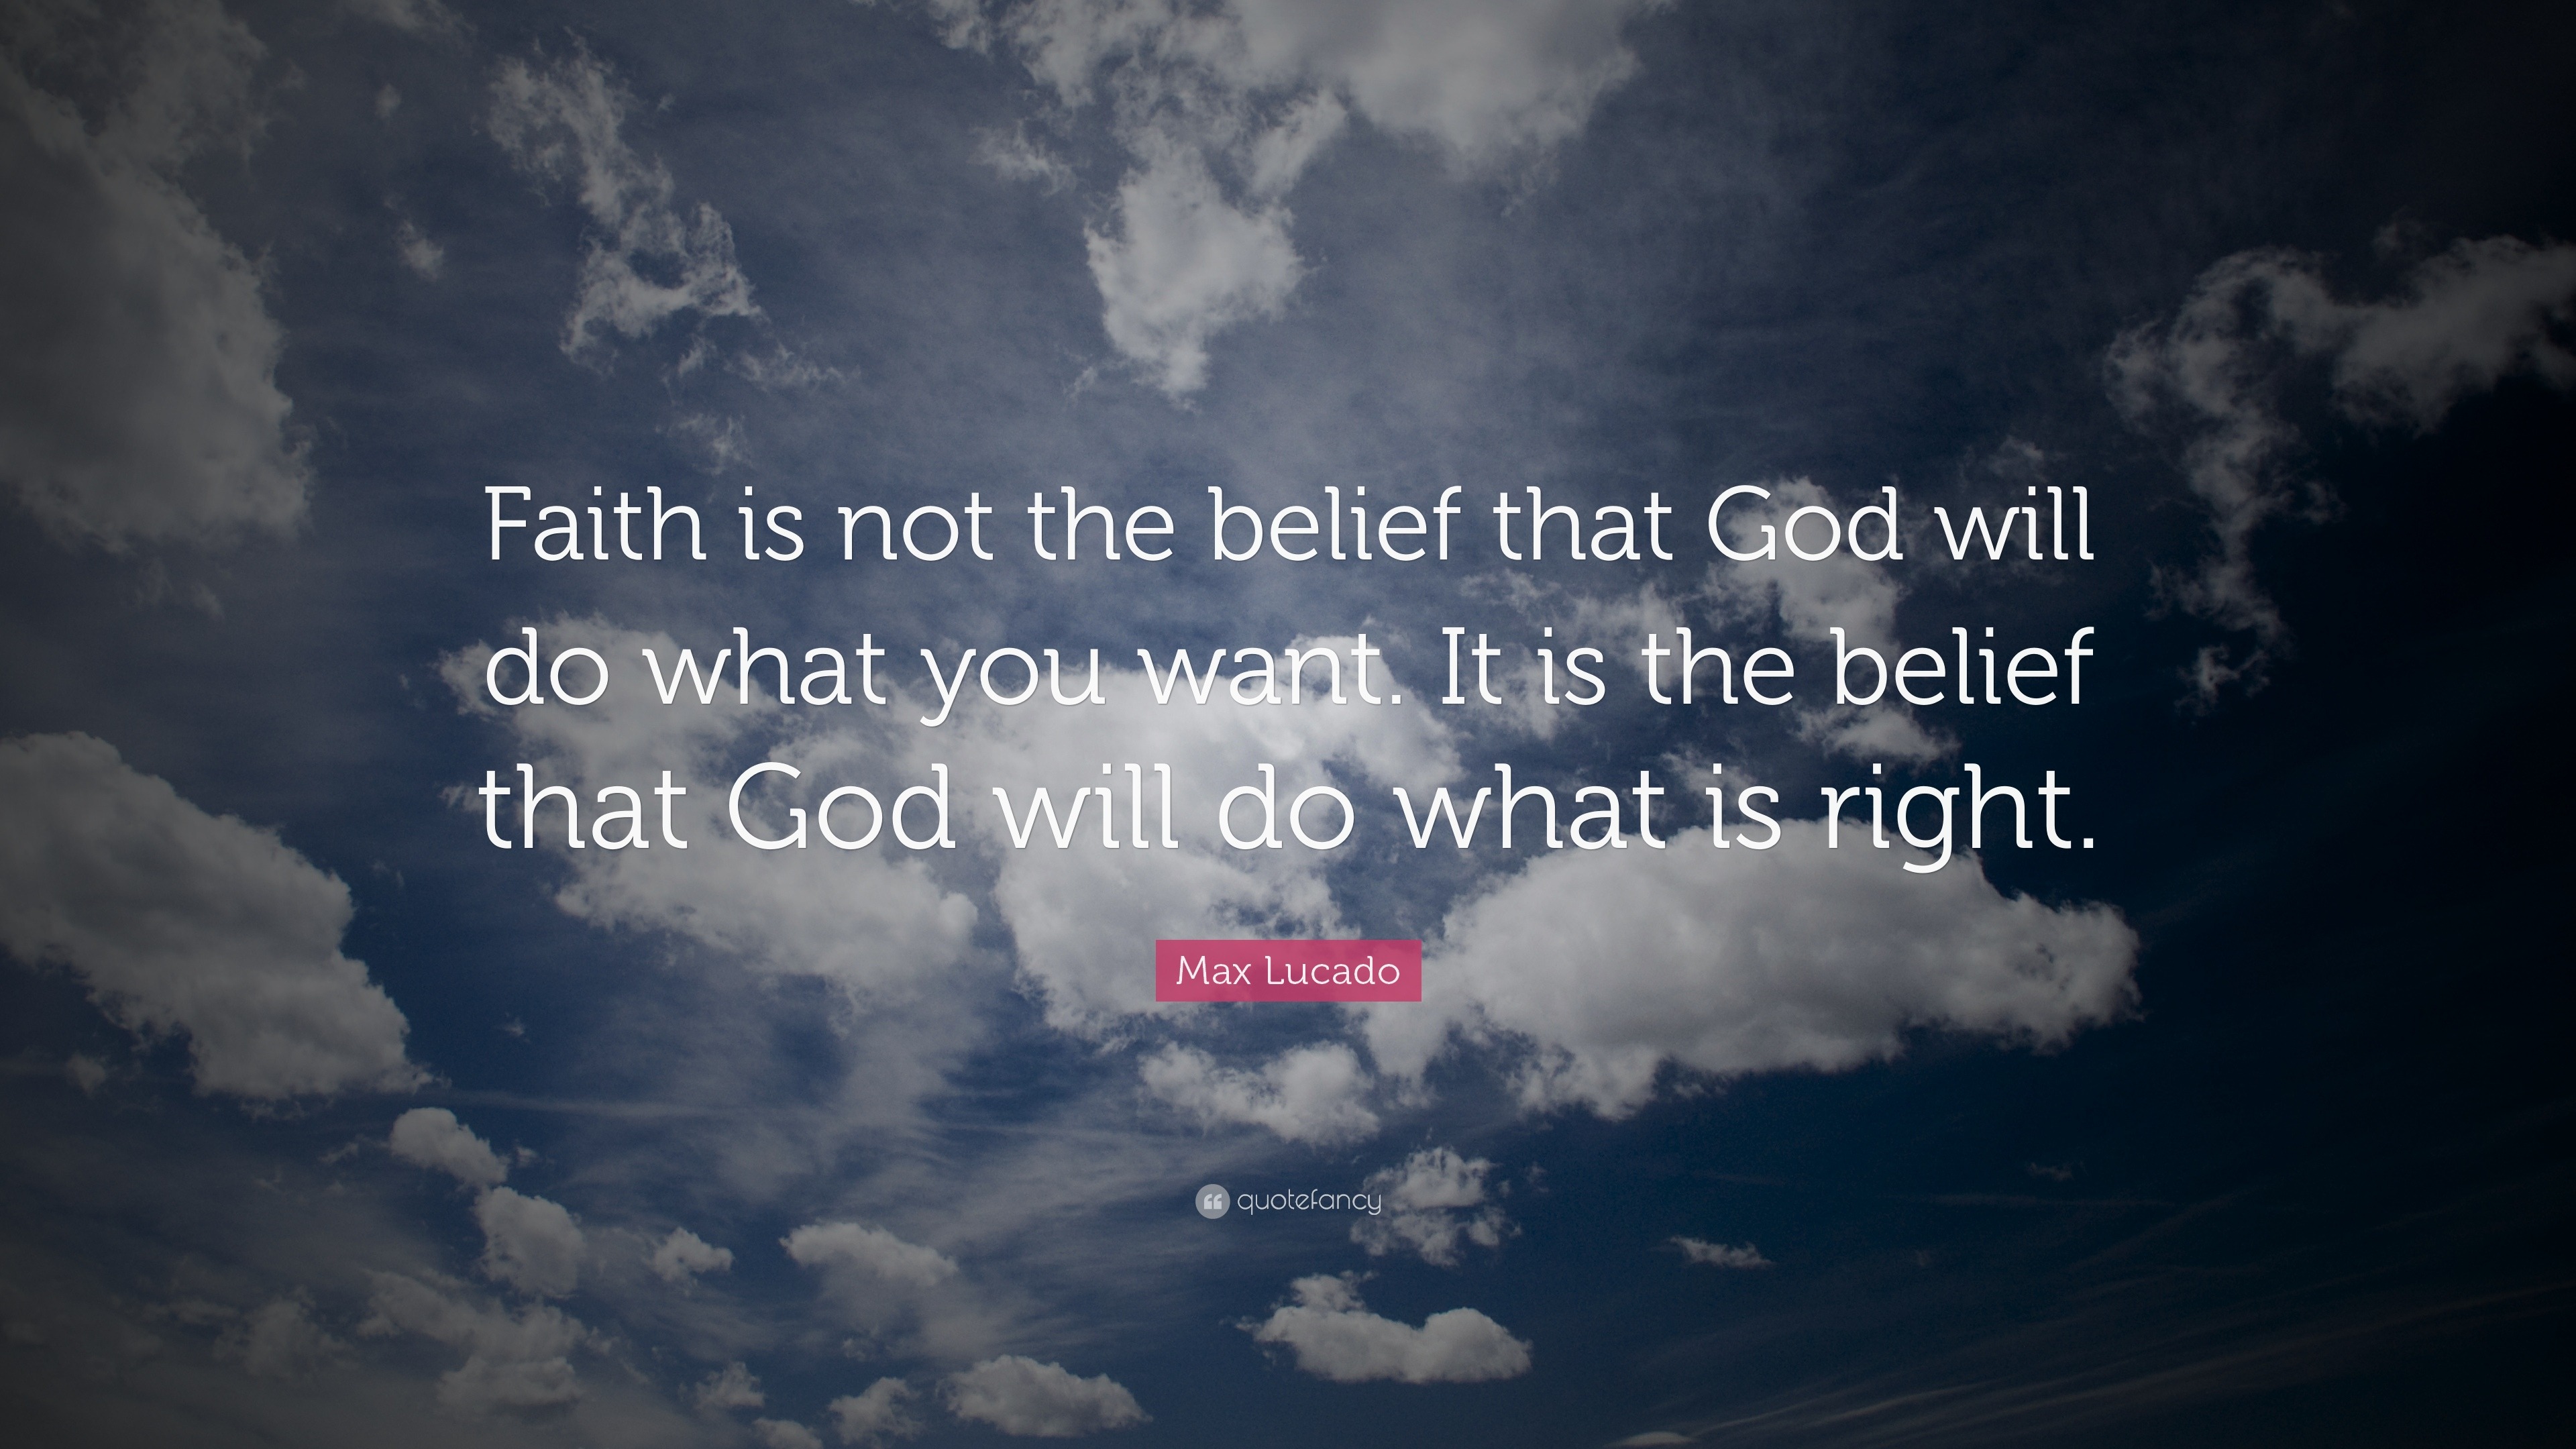 Max Lucado Quote: “Faith is not the belief that God will do what you